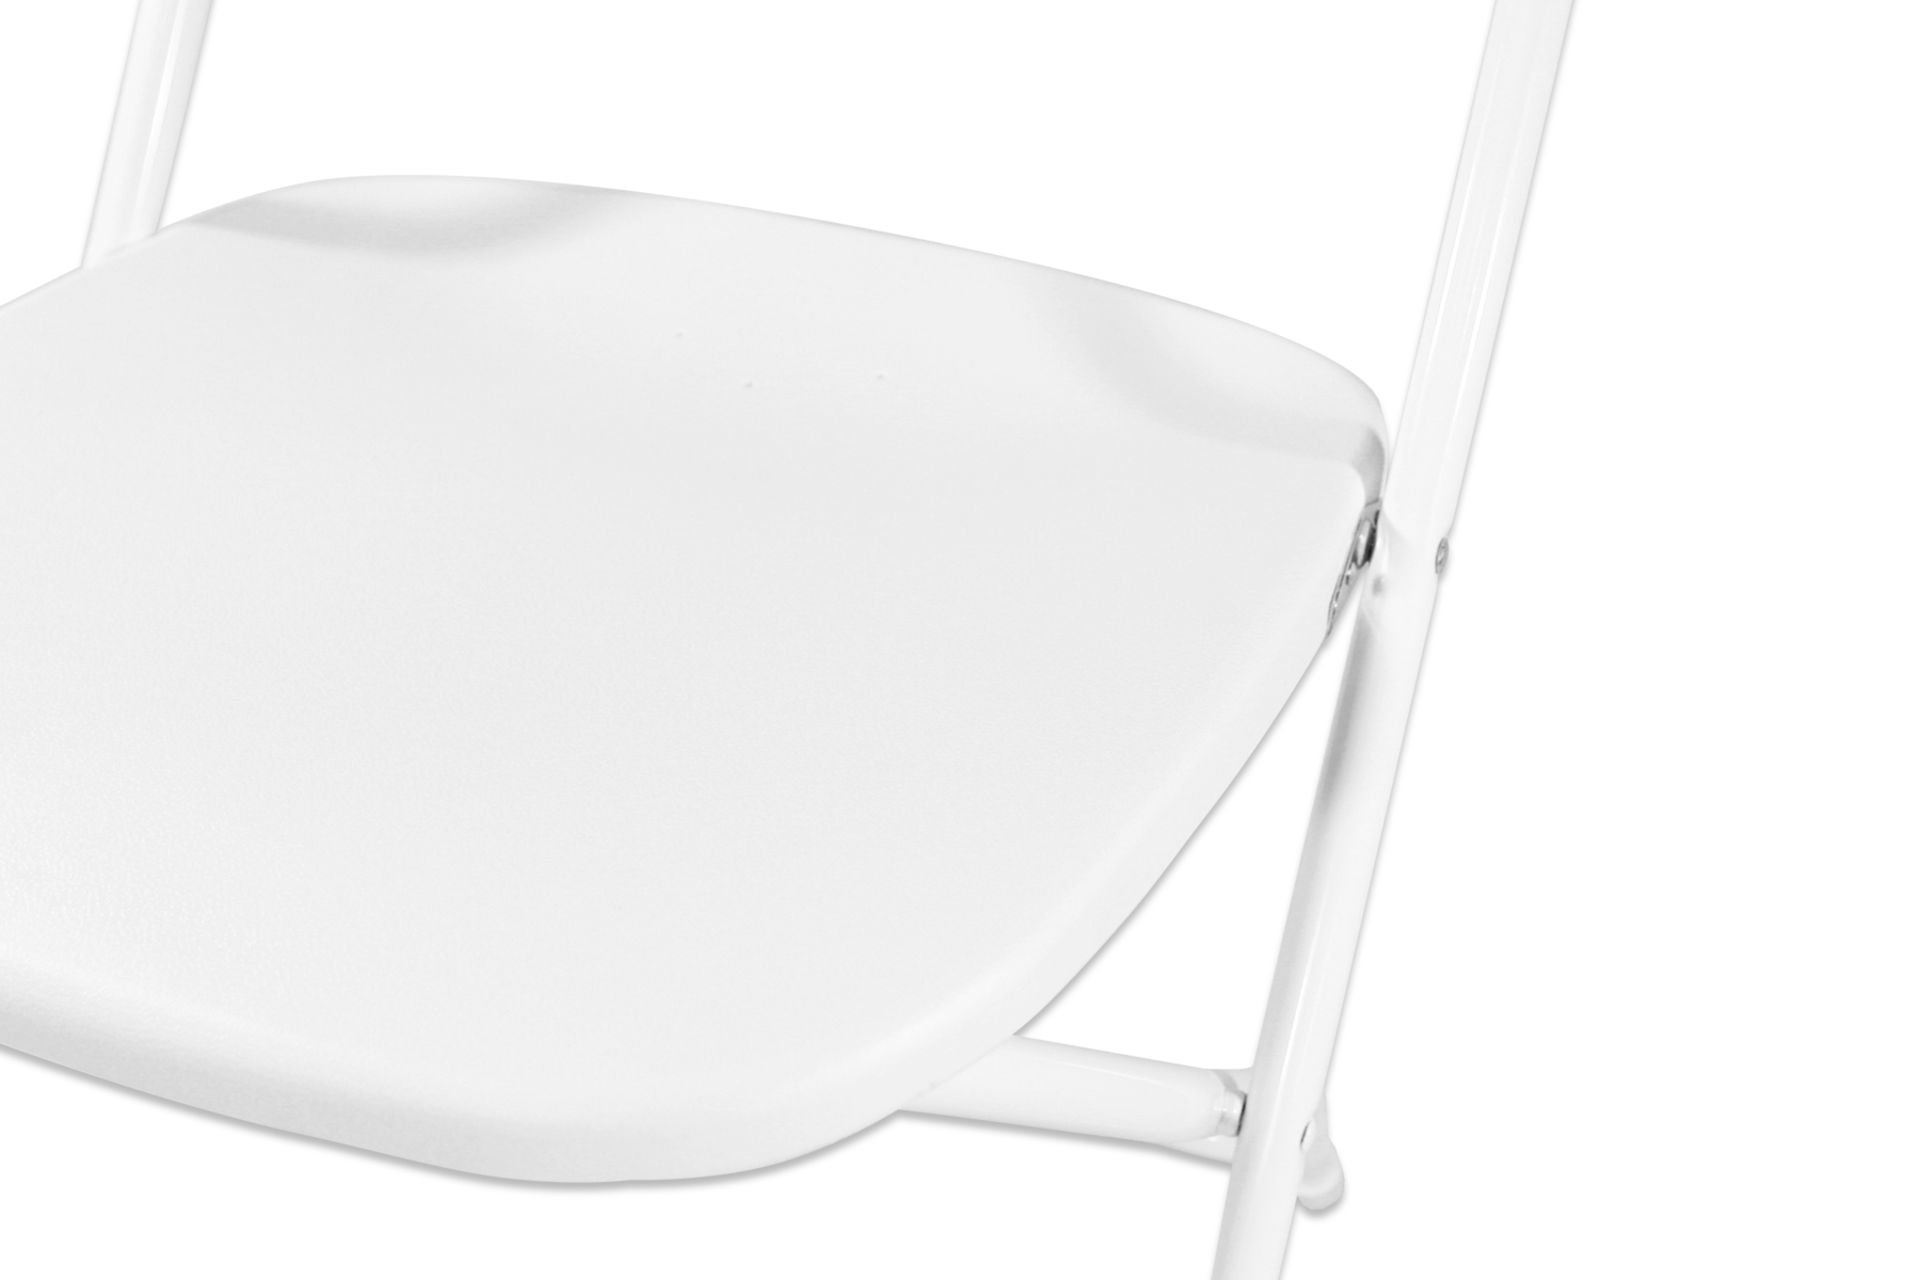 V *TRADE QTY* Grade A Folding Plastic Chair - White X1800 YOUR BID PRICE TO BE MULTIPLIED - Image 5 of 6